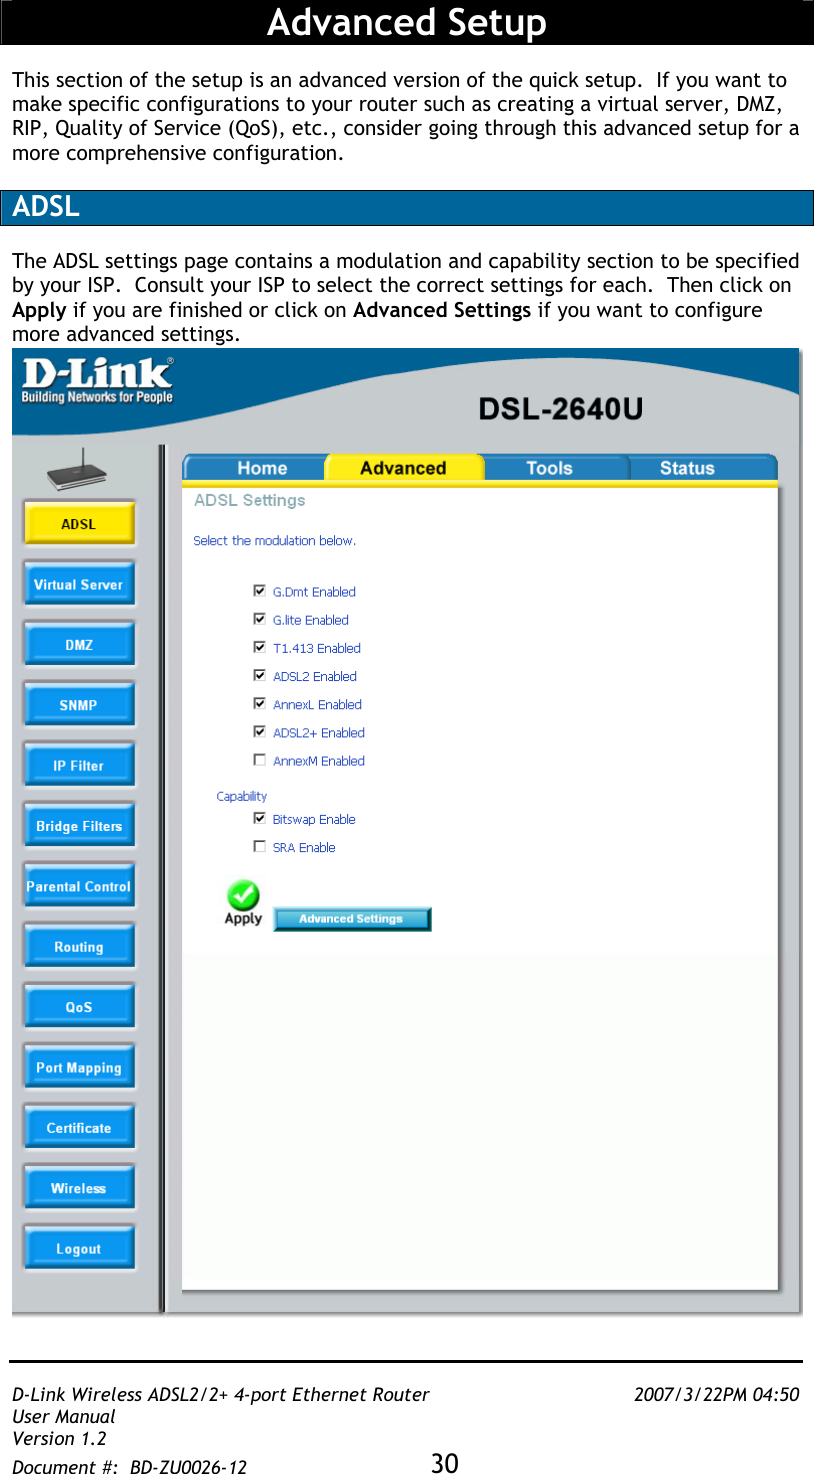   D-Link Wireless ADSL2/2+ 4-port Ethernet Router    2007/3/22PM 04:50 User Manual   Version 1.2 Document #:  BD-ZU0026-12 30    Advanced Setup  This section of the setup is an advanced version of the quick setup.  If you want to make specific configurations to your router such as creating a virtual server, DMZ, RIP, Quality of Service (QoS), etc., consider going through this advanced setup for a more comprehensive configuration.   ADSL   The ADSL settings page contains a modulation and capability section to be specified by your ISP.  Consult your ISP to select the correct settings for each.  Then click on Apply if you are finished or click on Advanced Settings if you want to configure more advanced settings.  